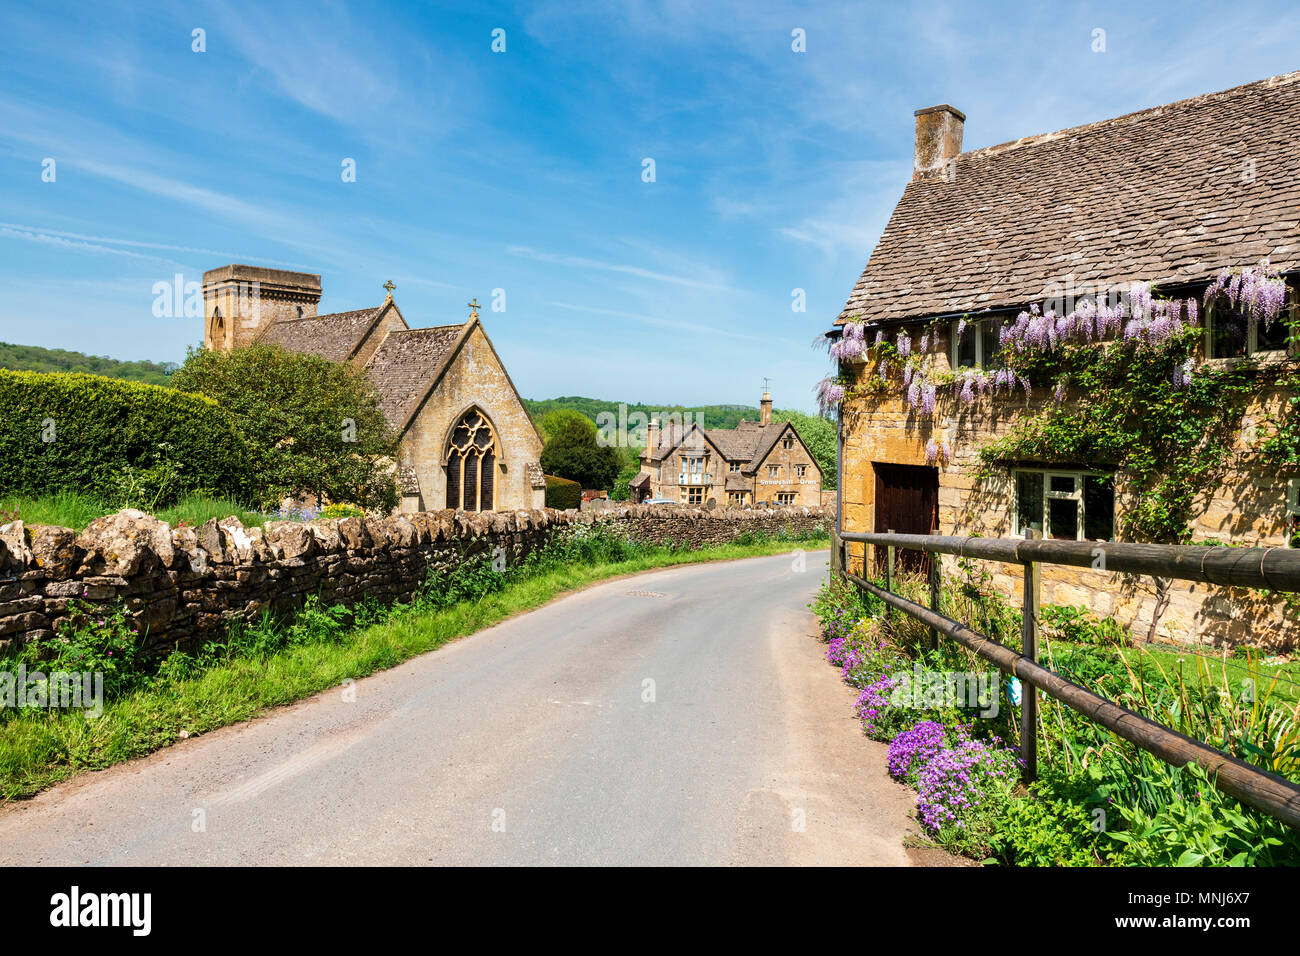 Snowshill, Cotswolds, England, UK. Wisteria flowers on a cottage next to the church in a Cotswold village. Stock Photo